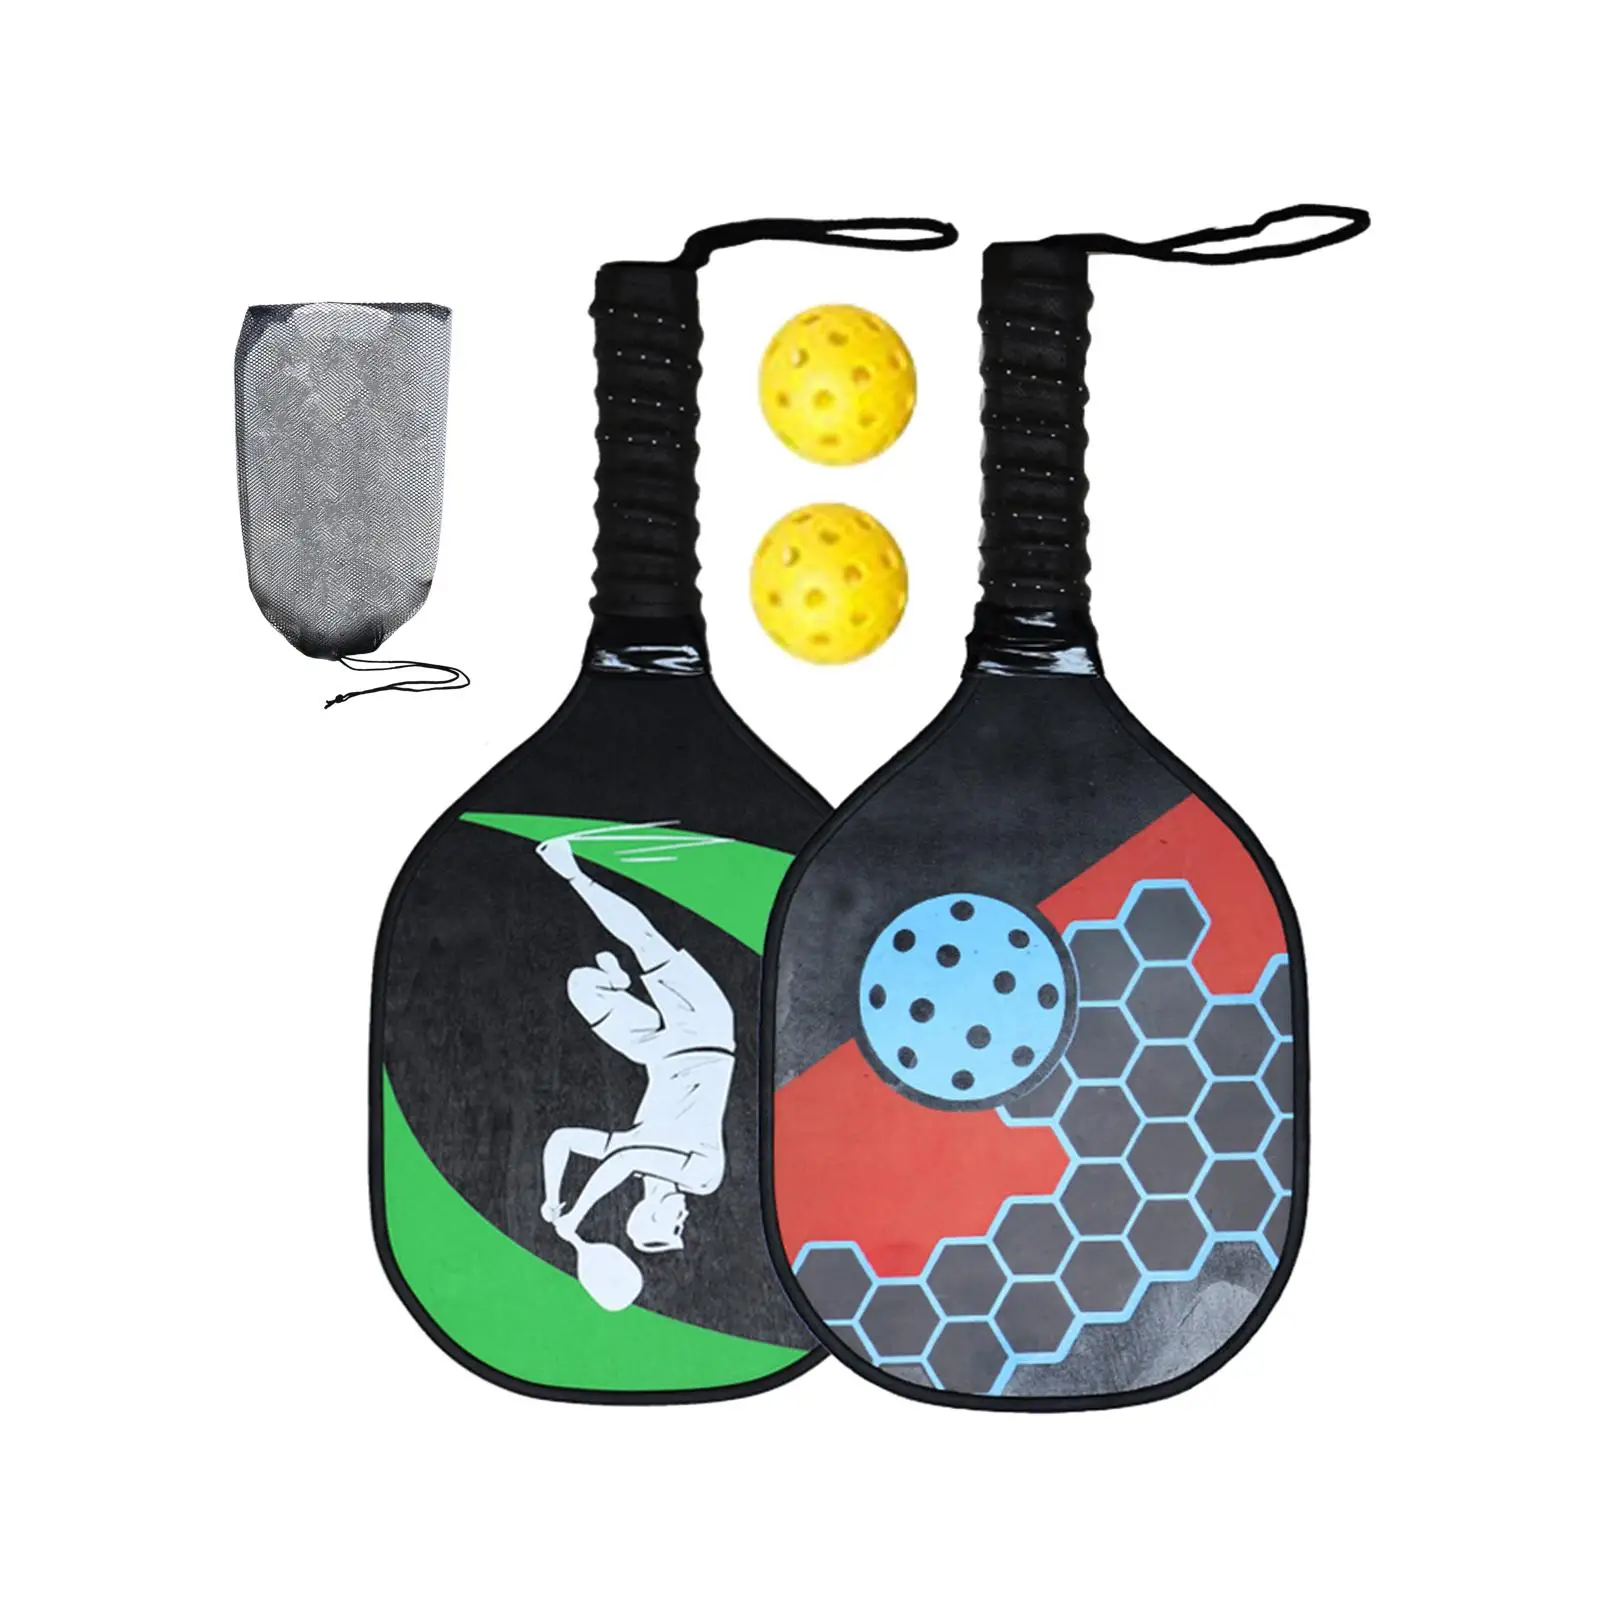 Wood Pickleball Paddles Beginner Racket for Families with Mesh Carry Bag